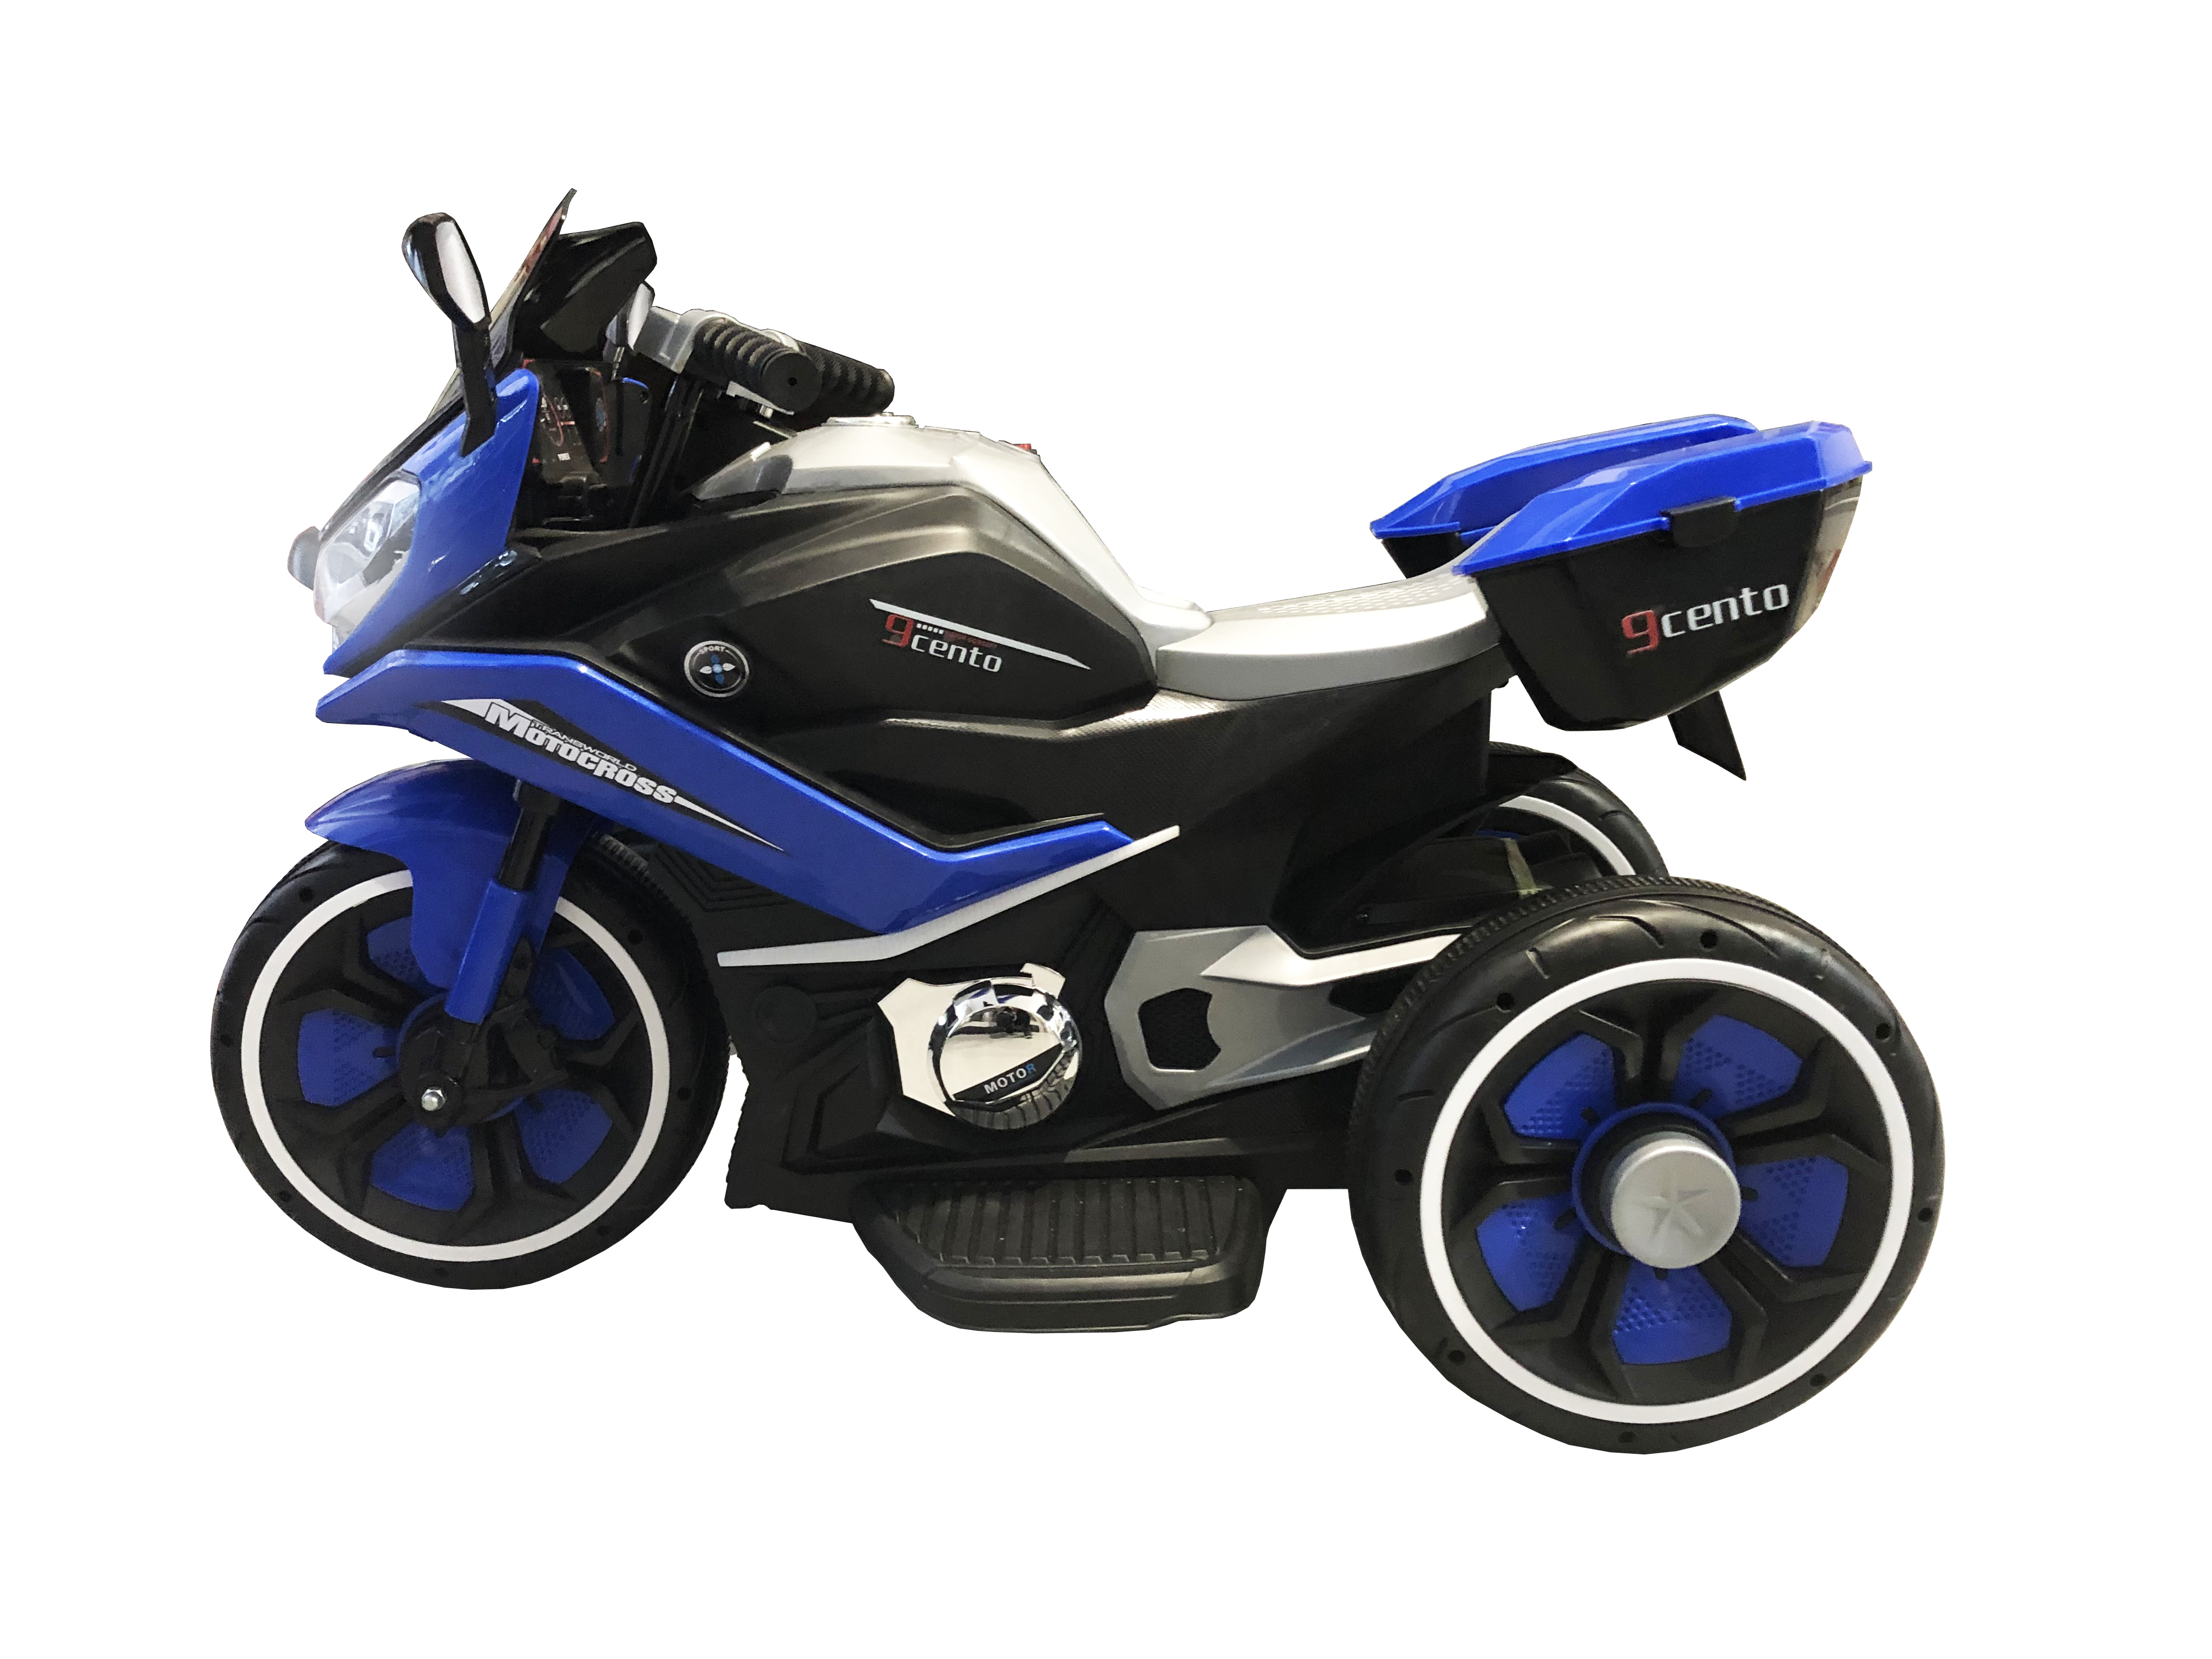 Kids Ride On Motorcycle Electric Battery powered New Arrival - Dealsdirect.co.nz